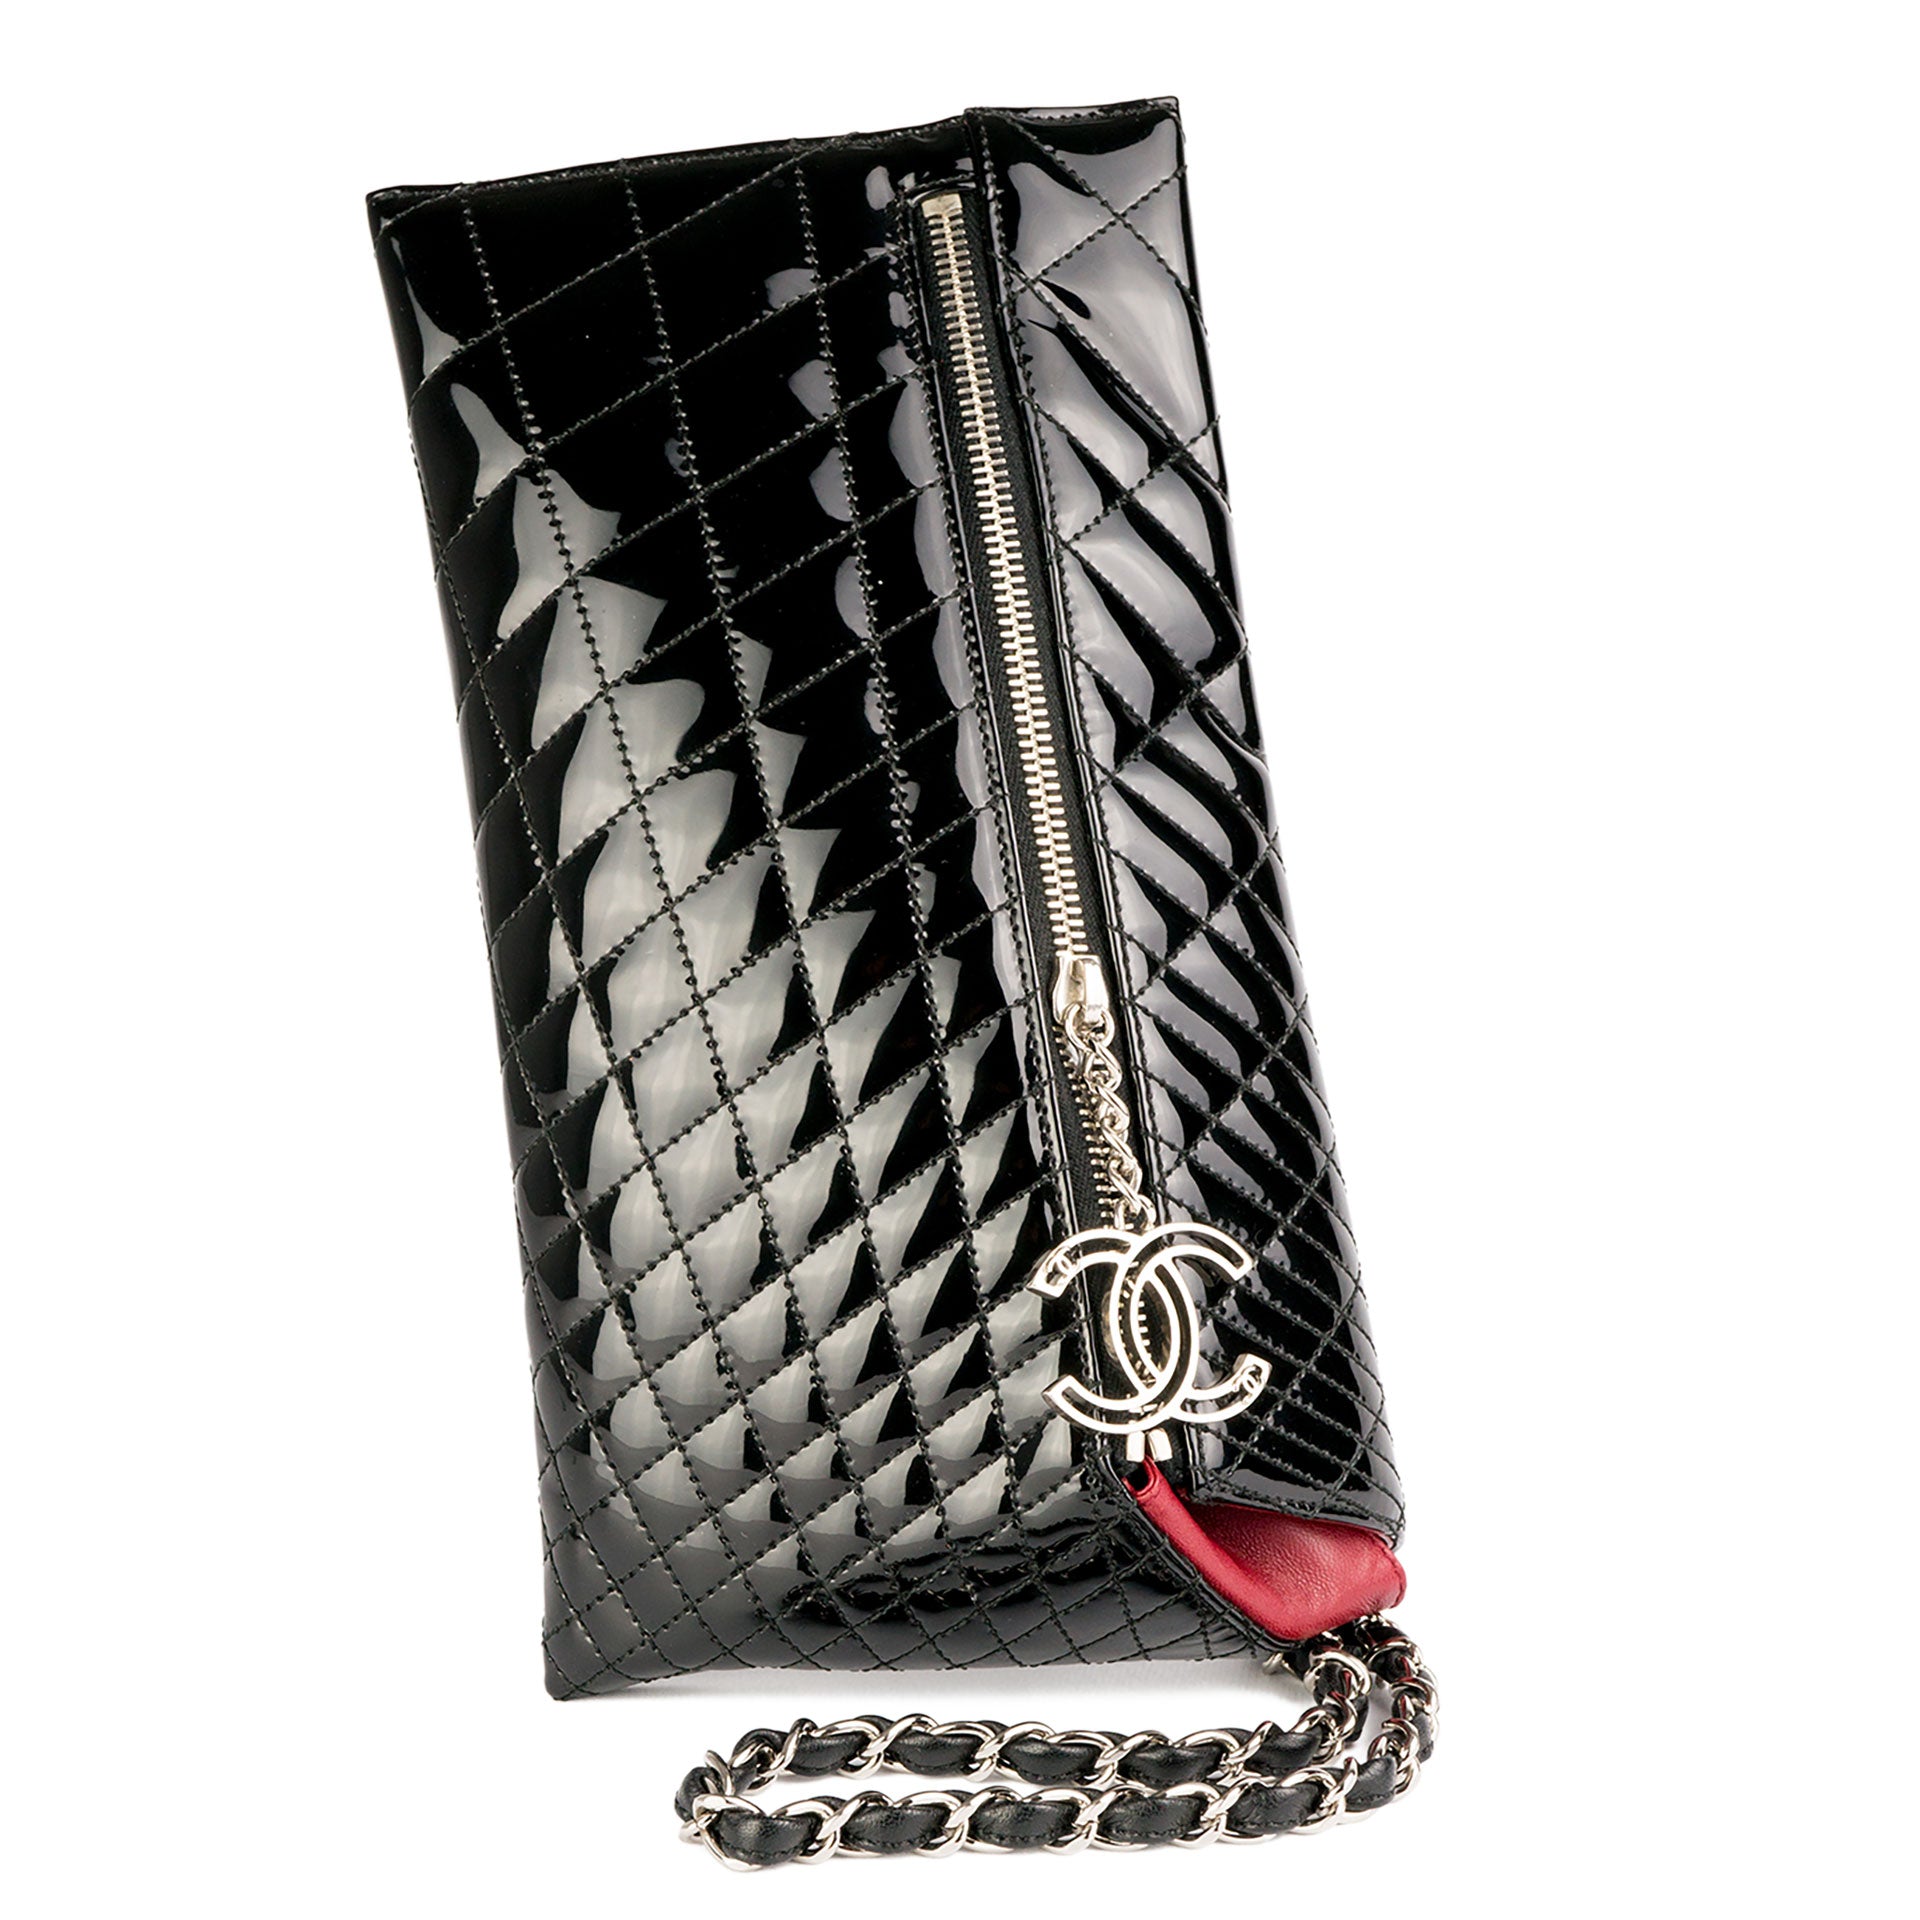 Charming Tailor Patent Leather Flap Clutch